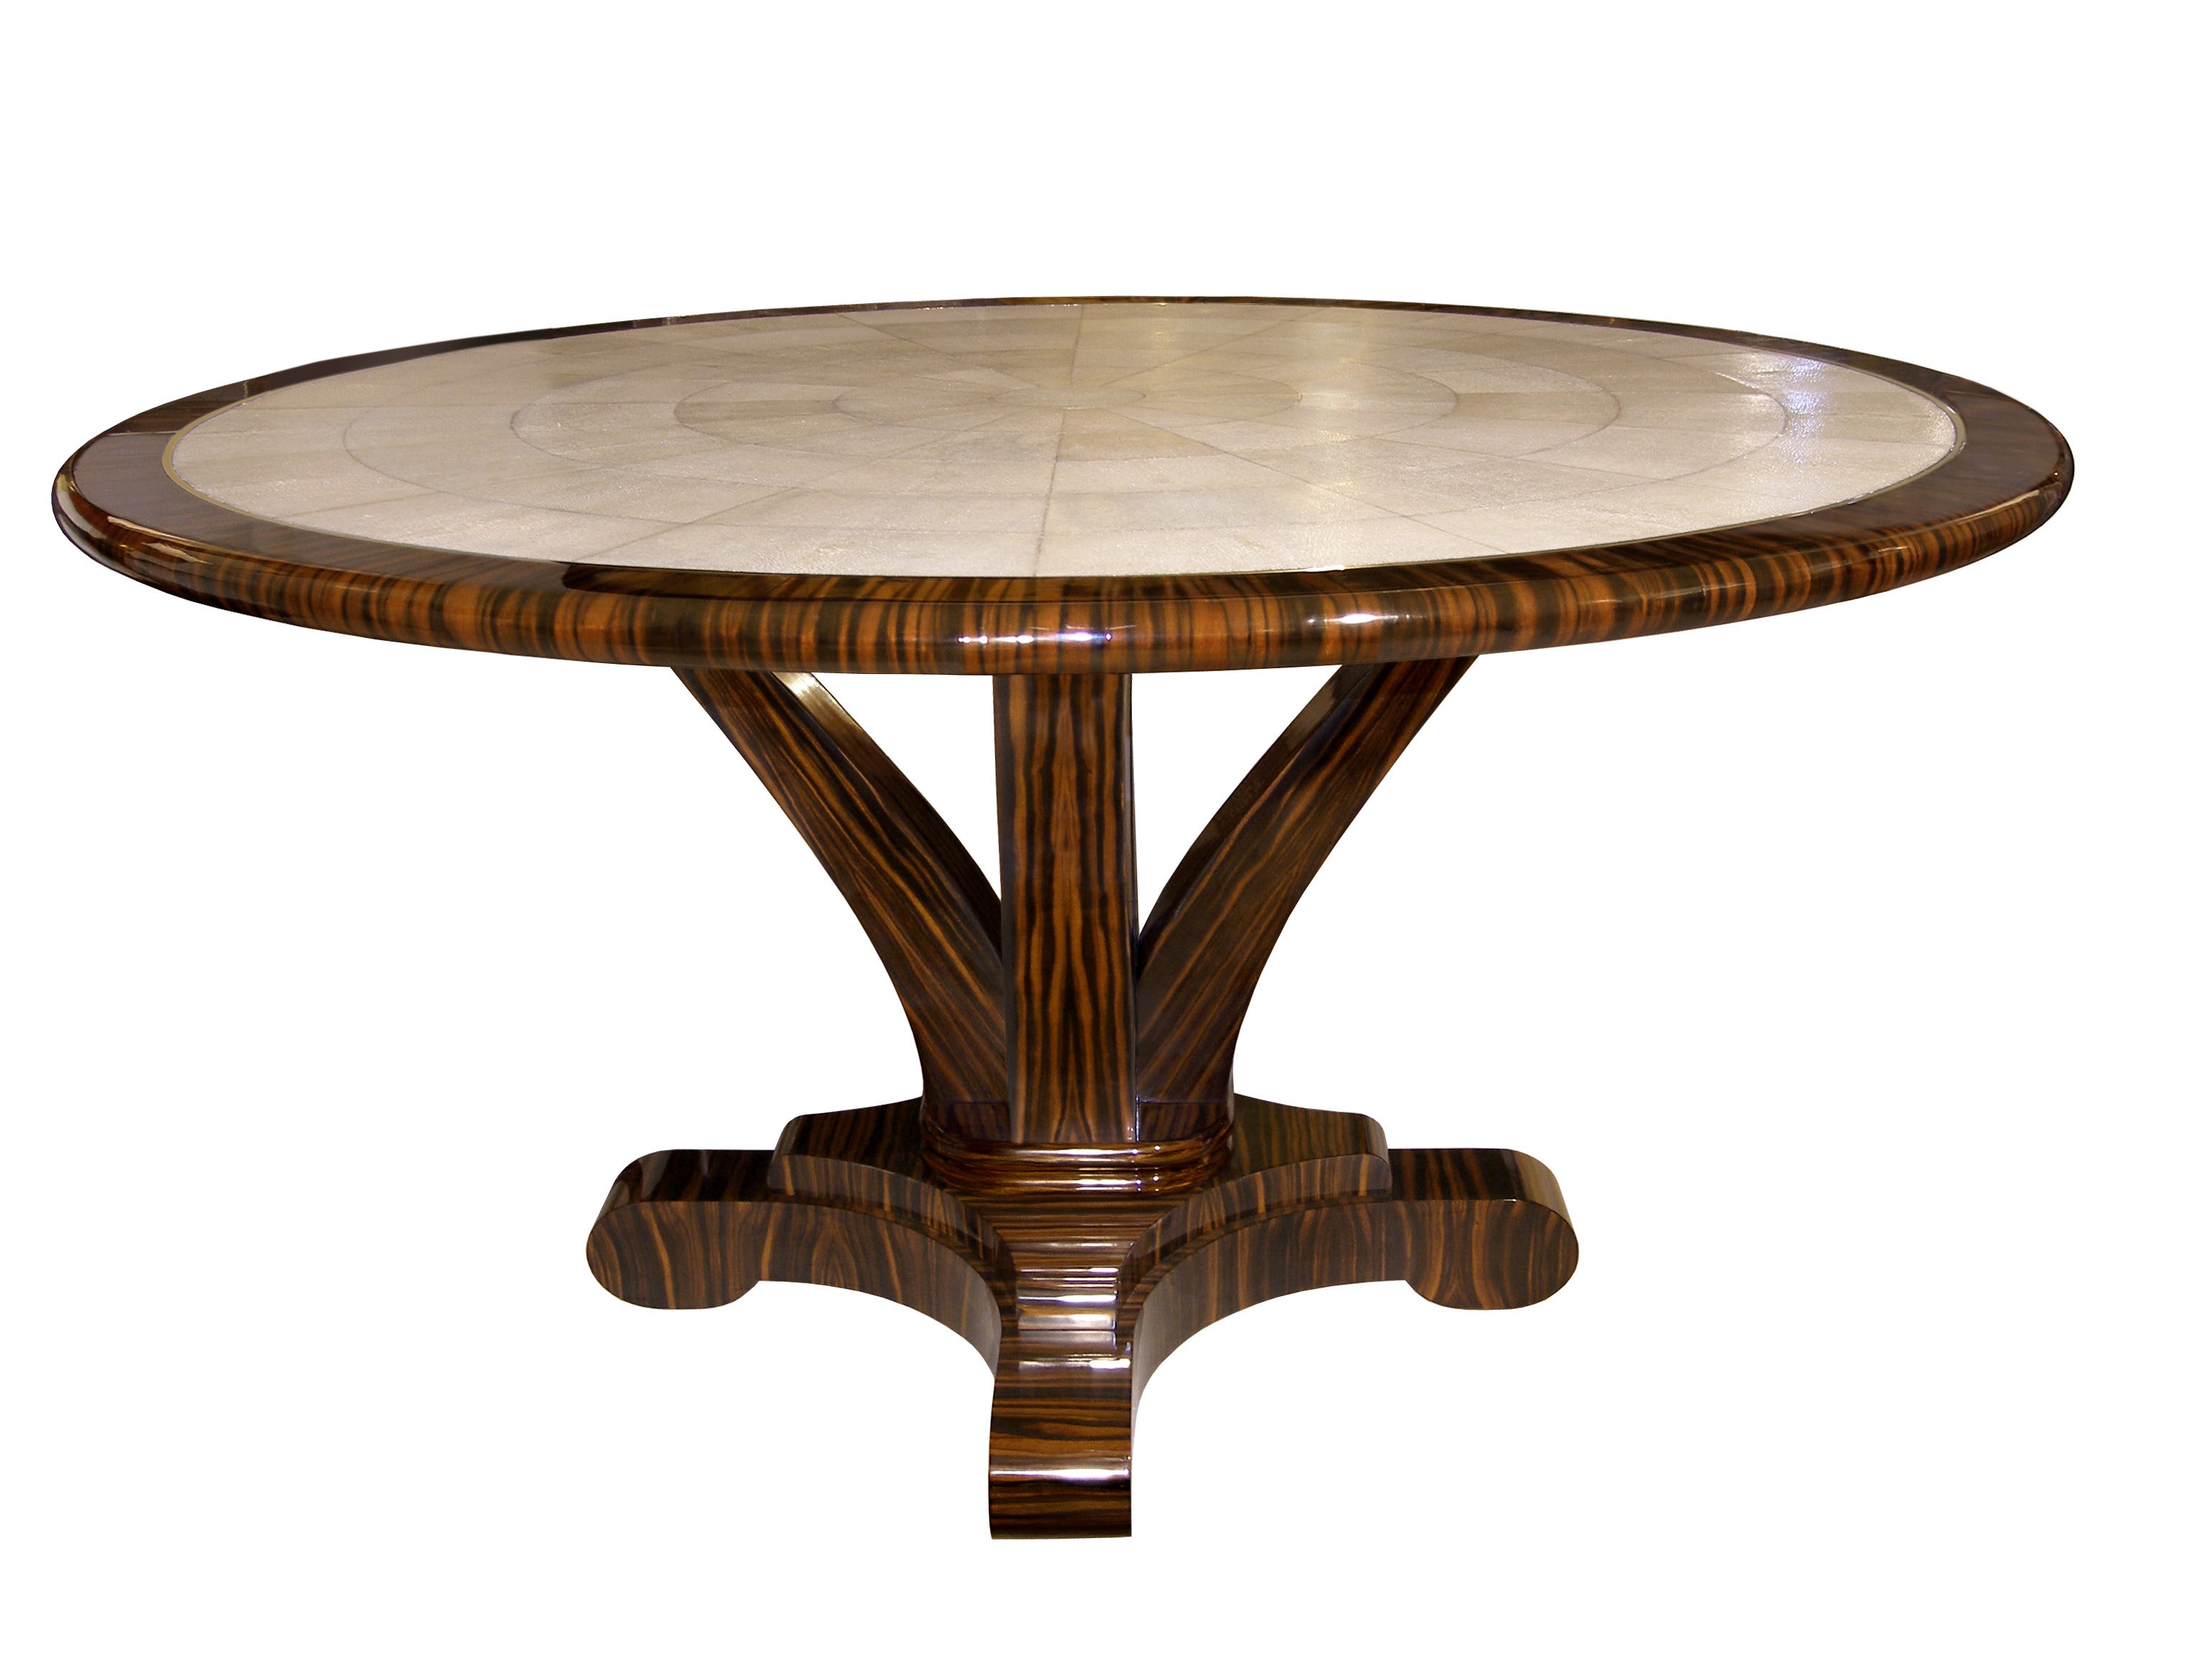 Delfine Macassar Ebony and Shagreen Table with Brass Detail For Sale